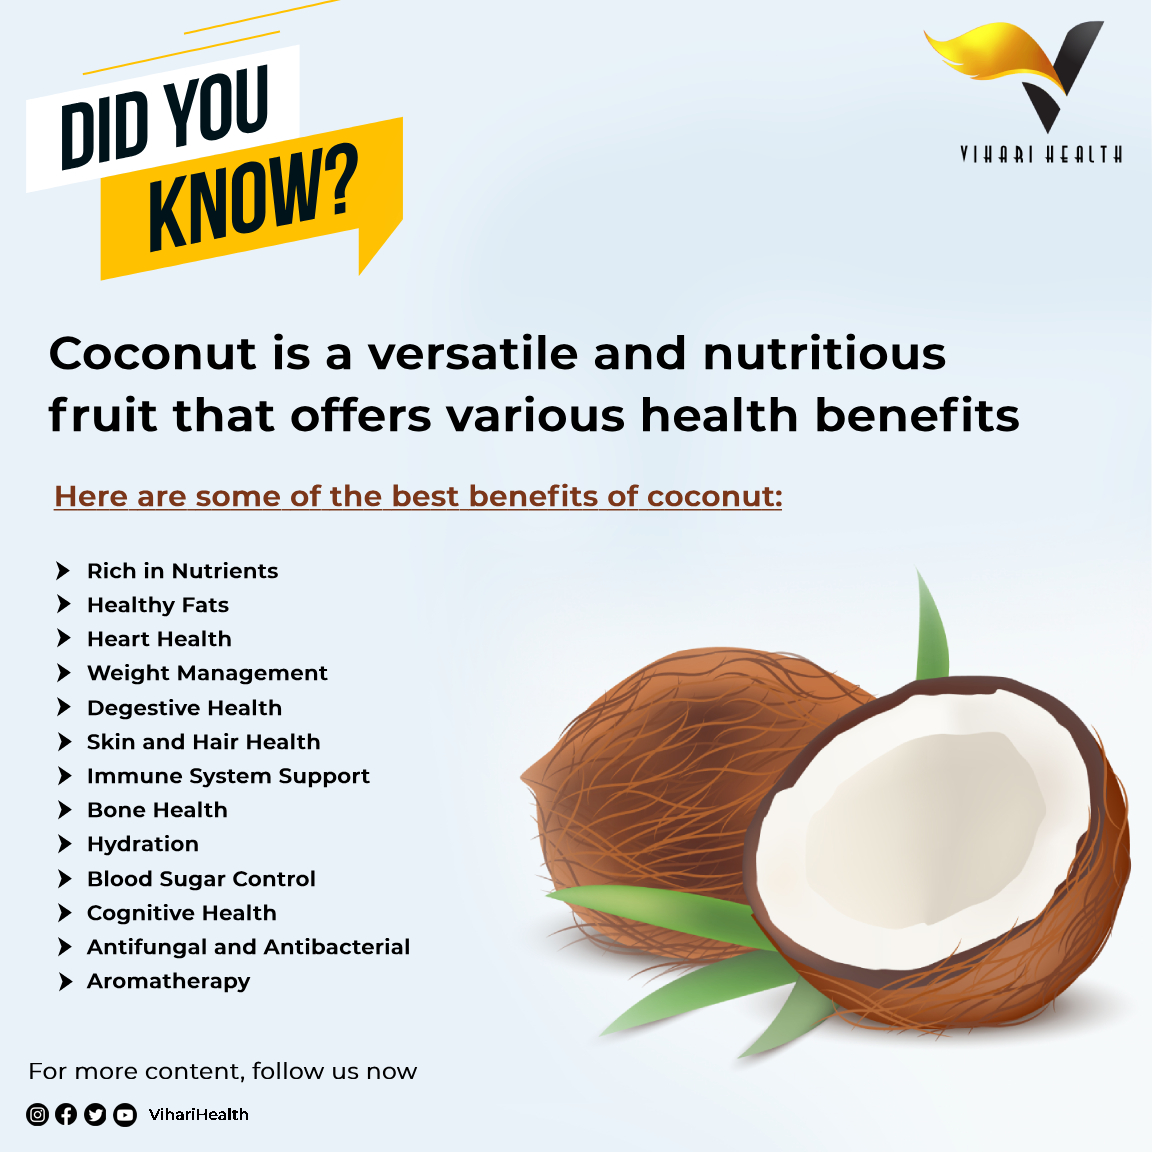 Coconut is a versatile food that offers various health benefits
Have some coconut in diet and be healthy always📷
For more health tips, please do follow Vihari Health
#Viharihealth #healthtips #coconut #coconutbenefits📷 #coconutbenefits #coconutuses #besthealthtips